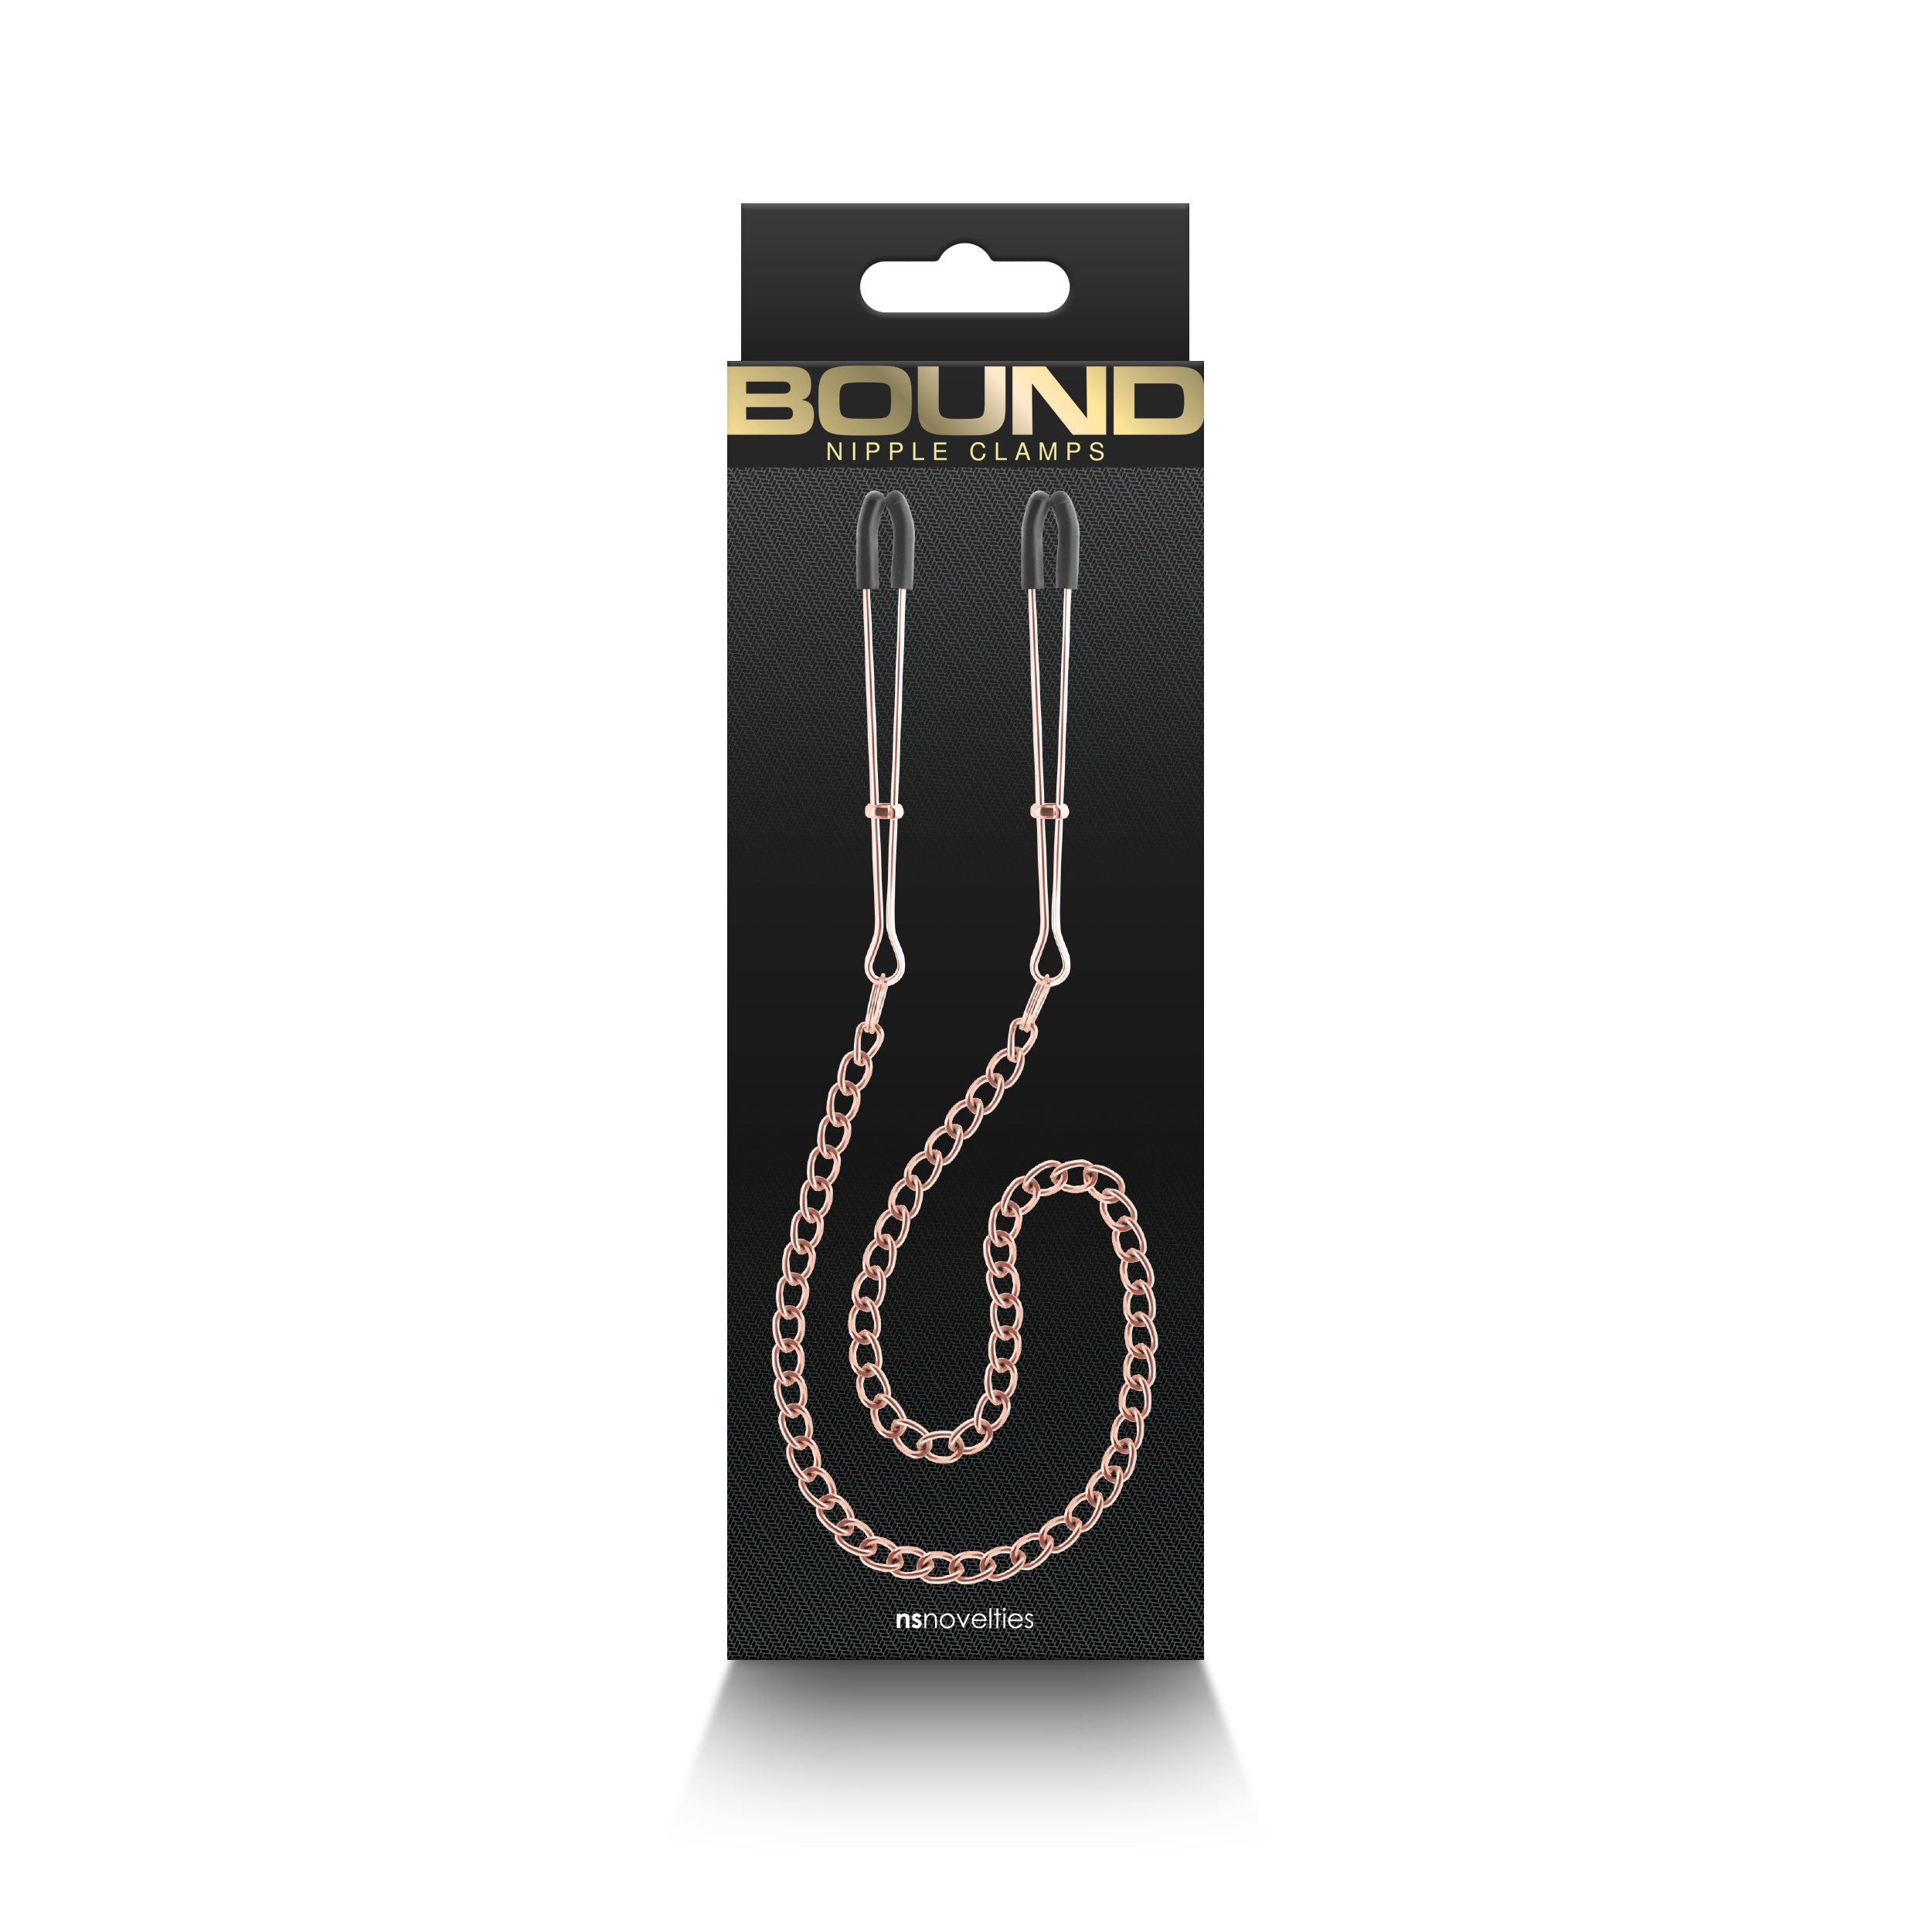 Bound - Nipple Clamps - Dc3 - Rose Gold-0